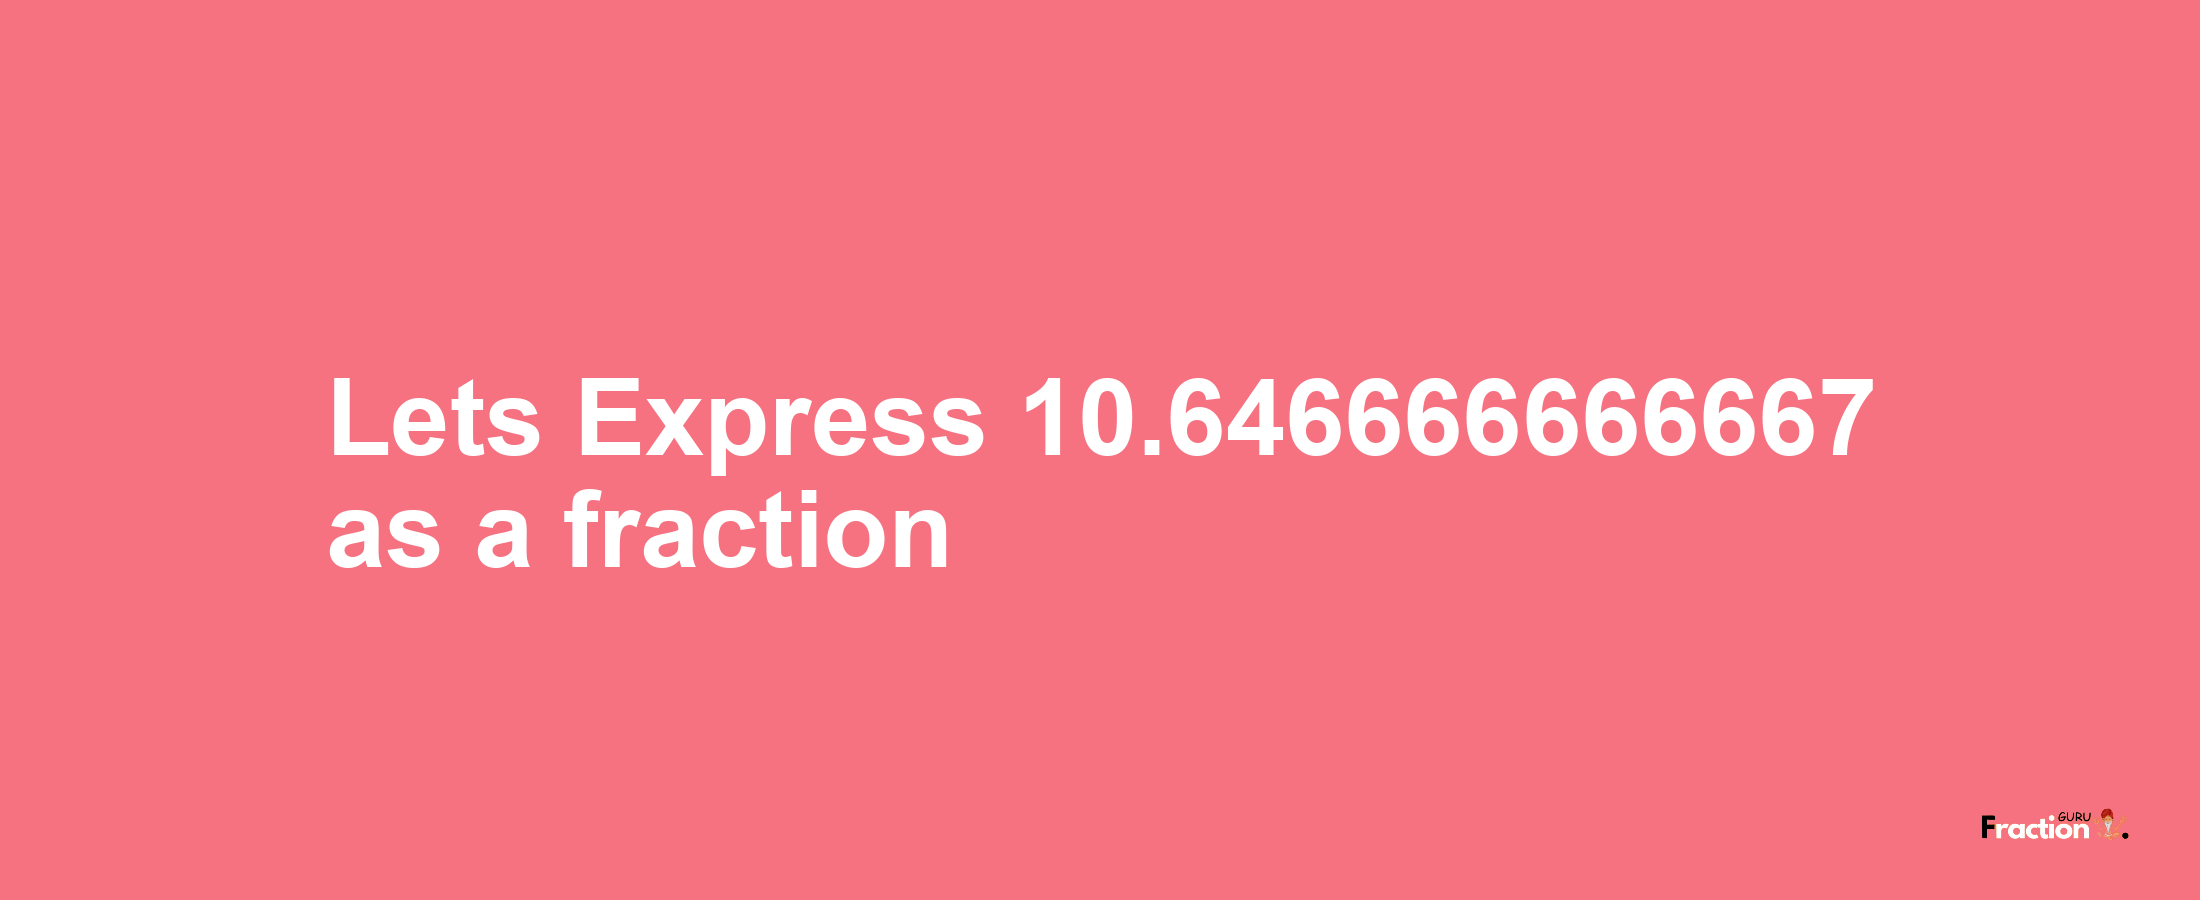 Lets Express 10.646666666667 as afraction